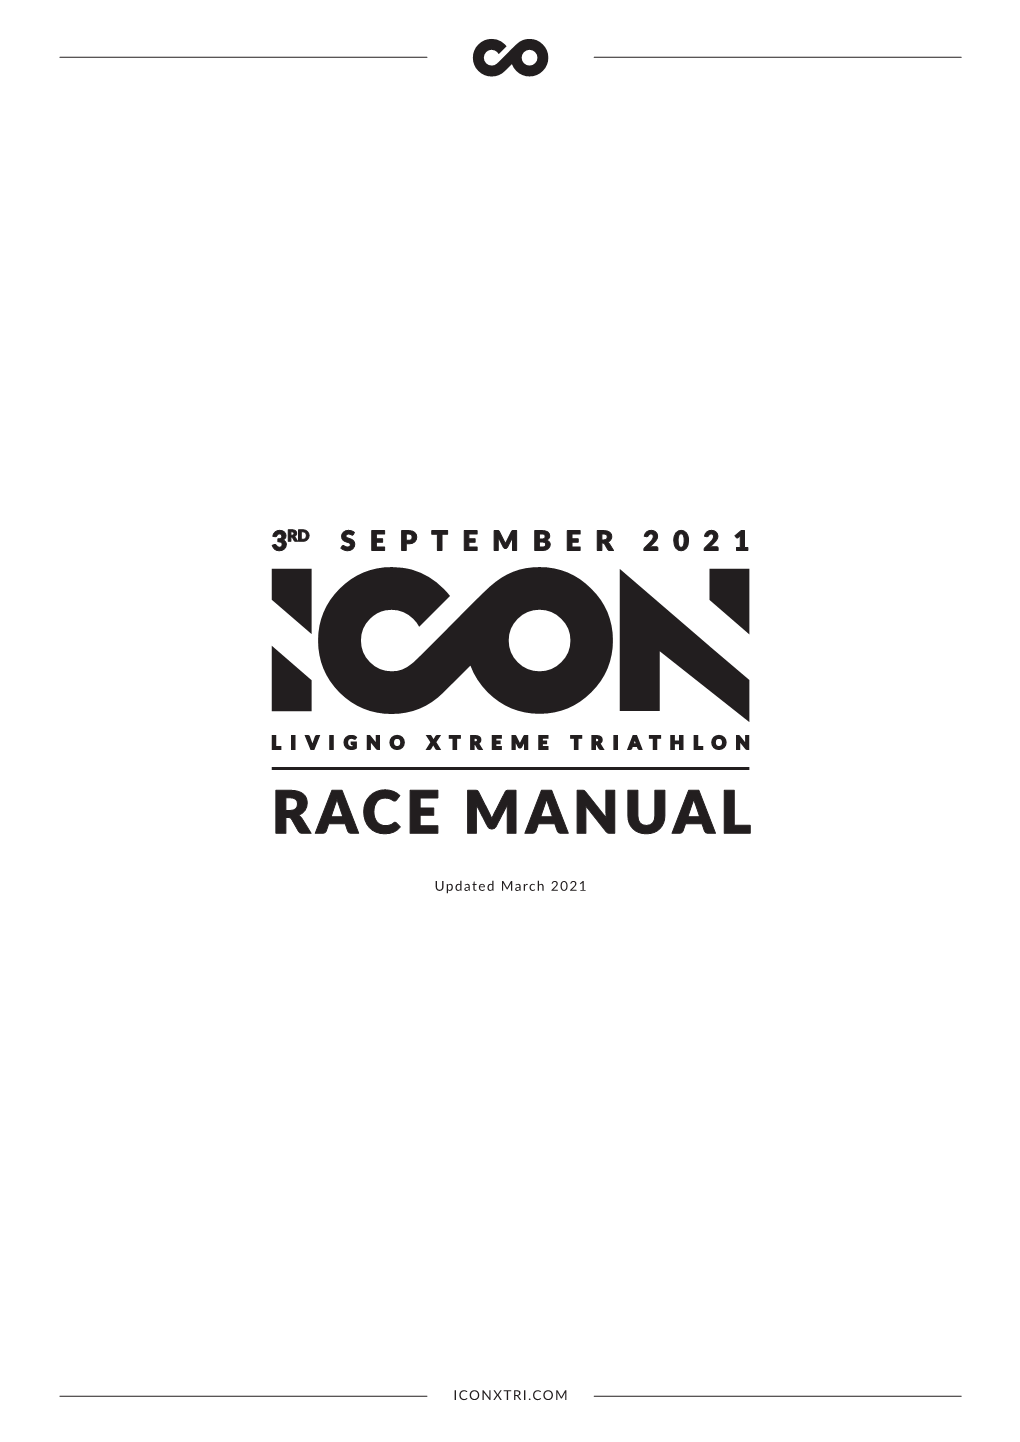 ICON Race Manual ENG 2021.Indd